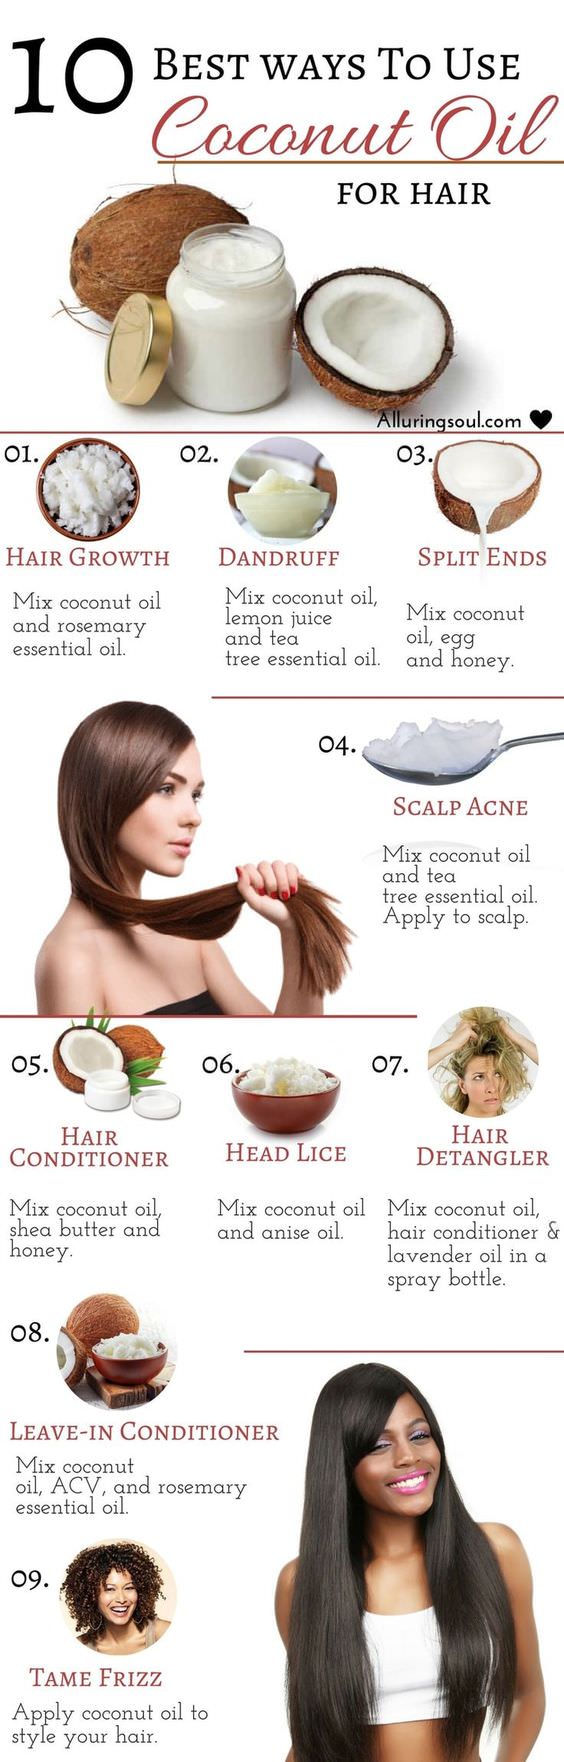 Coconut oil for hair is the best oil to provide proper nourishment for hair growth, dandruff, and every hair woes. Check out 10 best ways to use coconut oil.